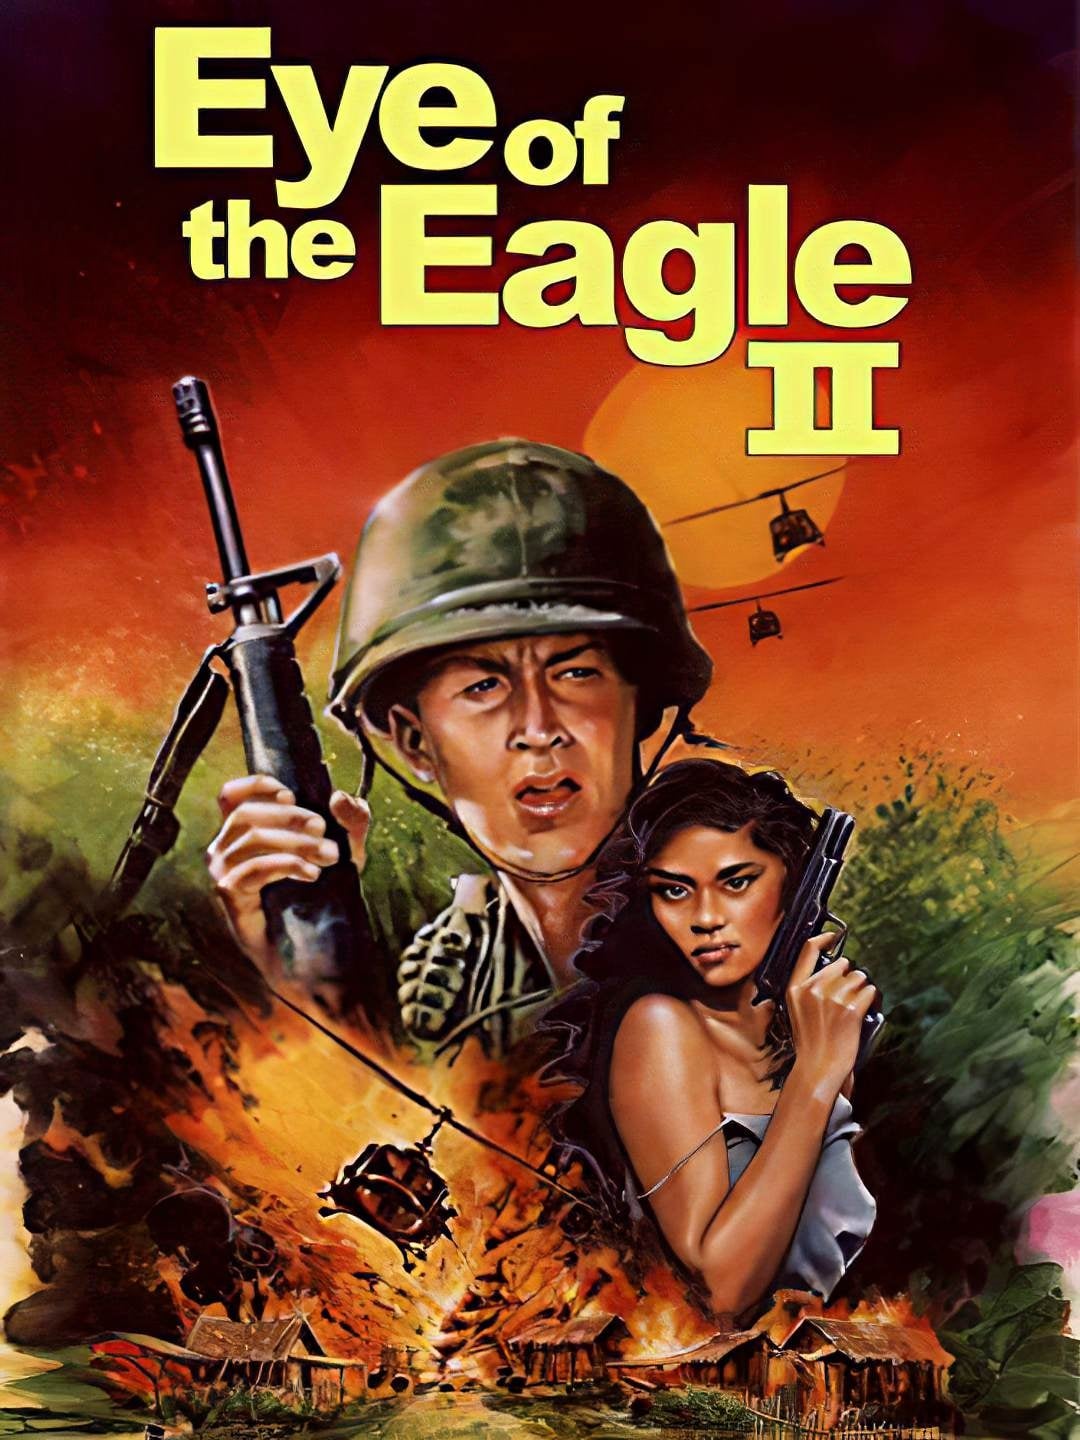 Eye of the Eagle 2: Inside the Enemy (1989)